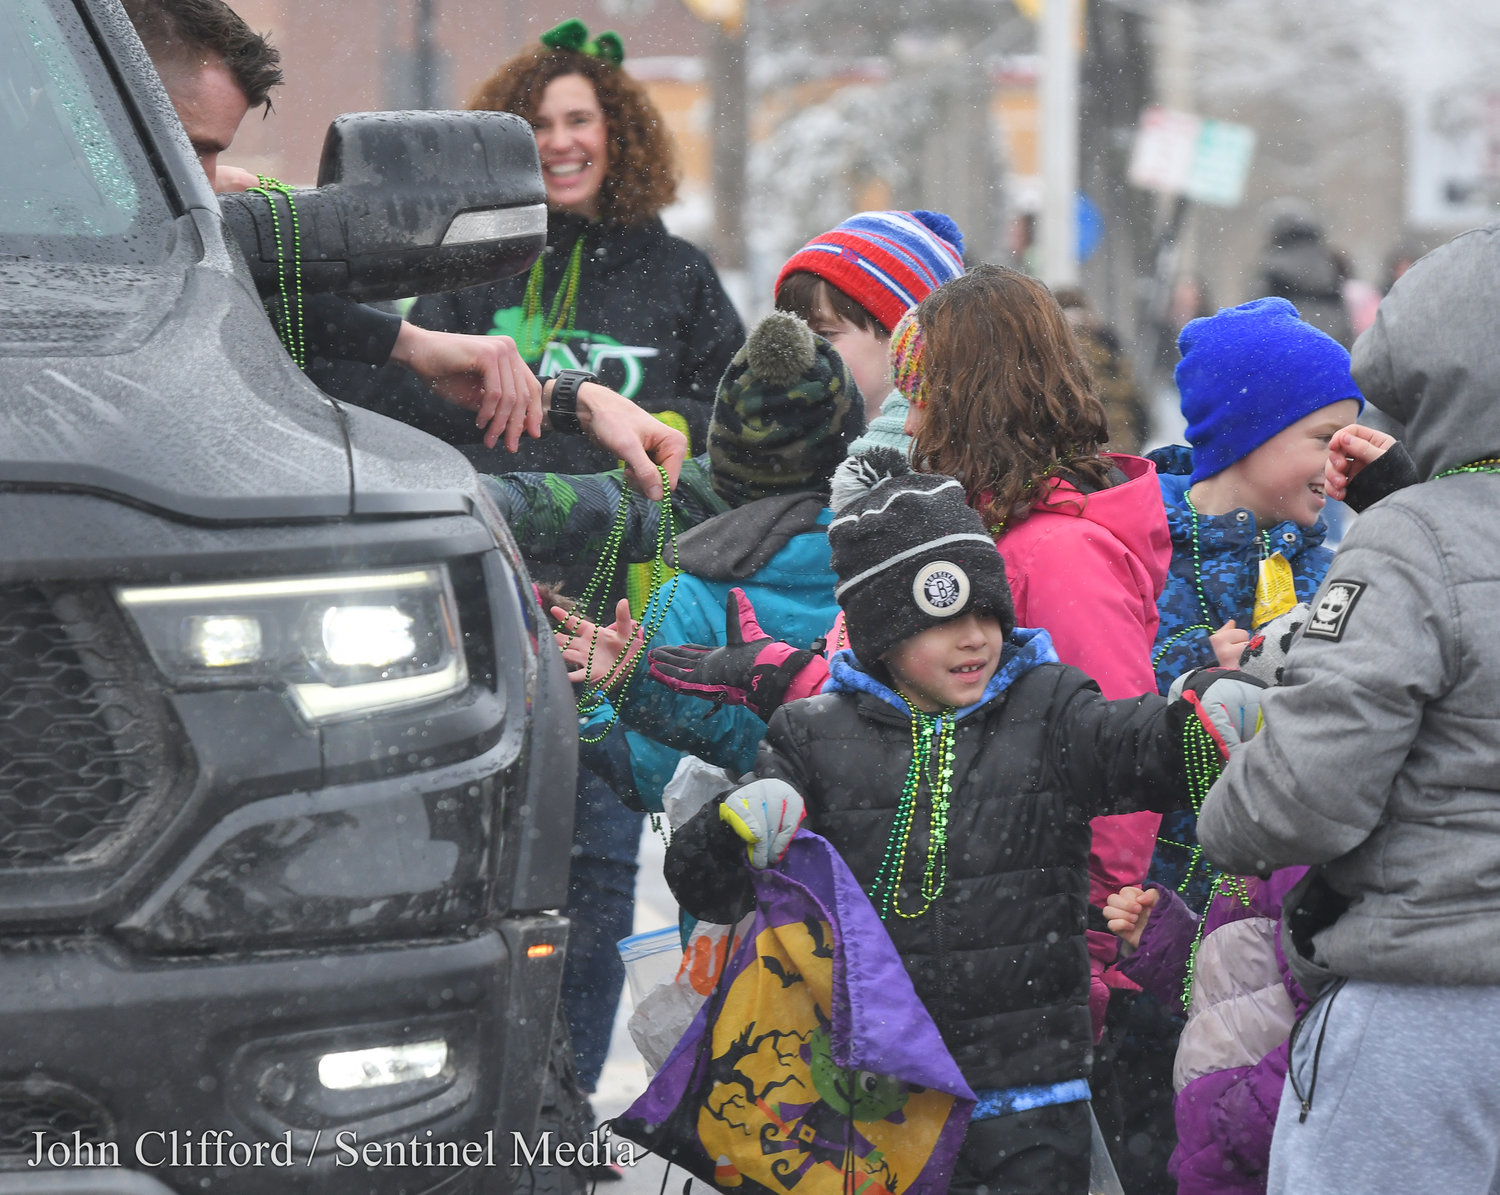 Pictured is a sight from the St. Patricks Day parade on Genesee Street in Utica on Saturday, March 11, 2023.